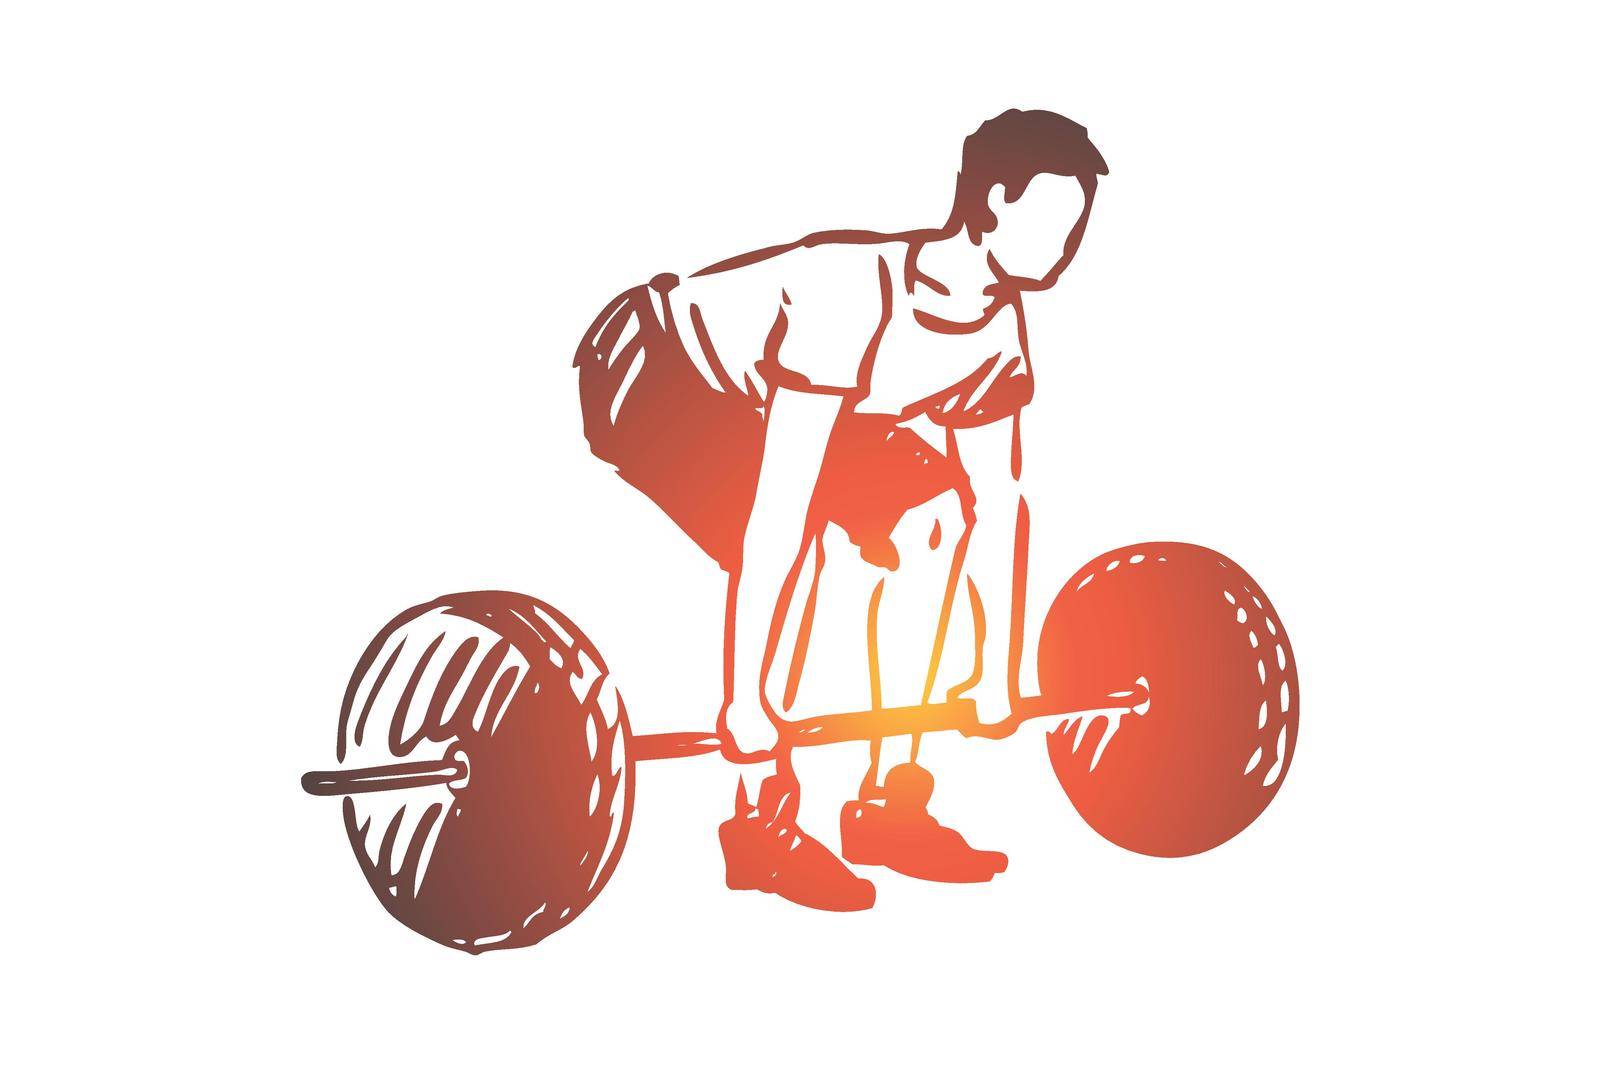 Gym, barbell, fitness, man, workout concept. Hand drawn sportive man workout in gym concept sketch. Isolated vector illustration.